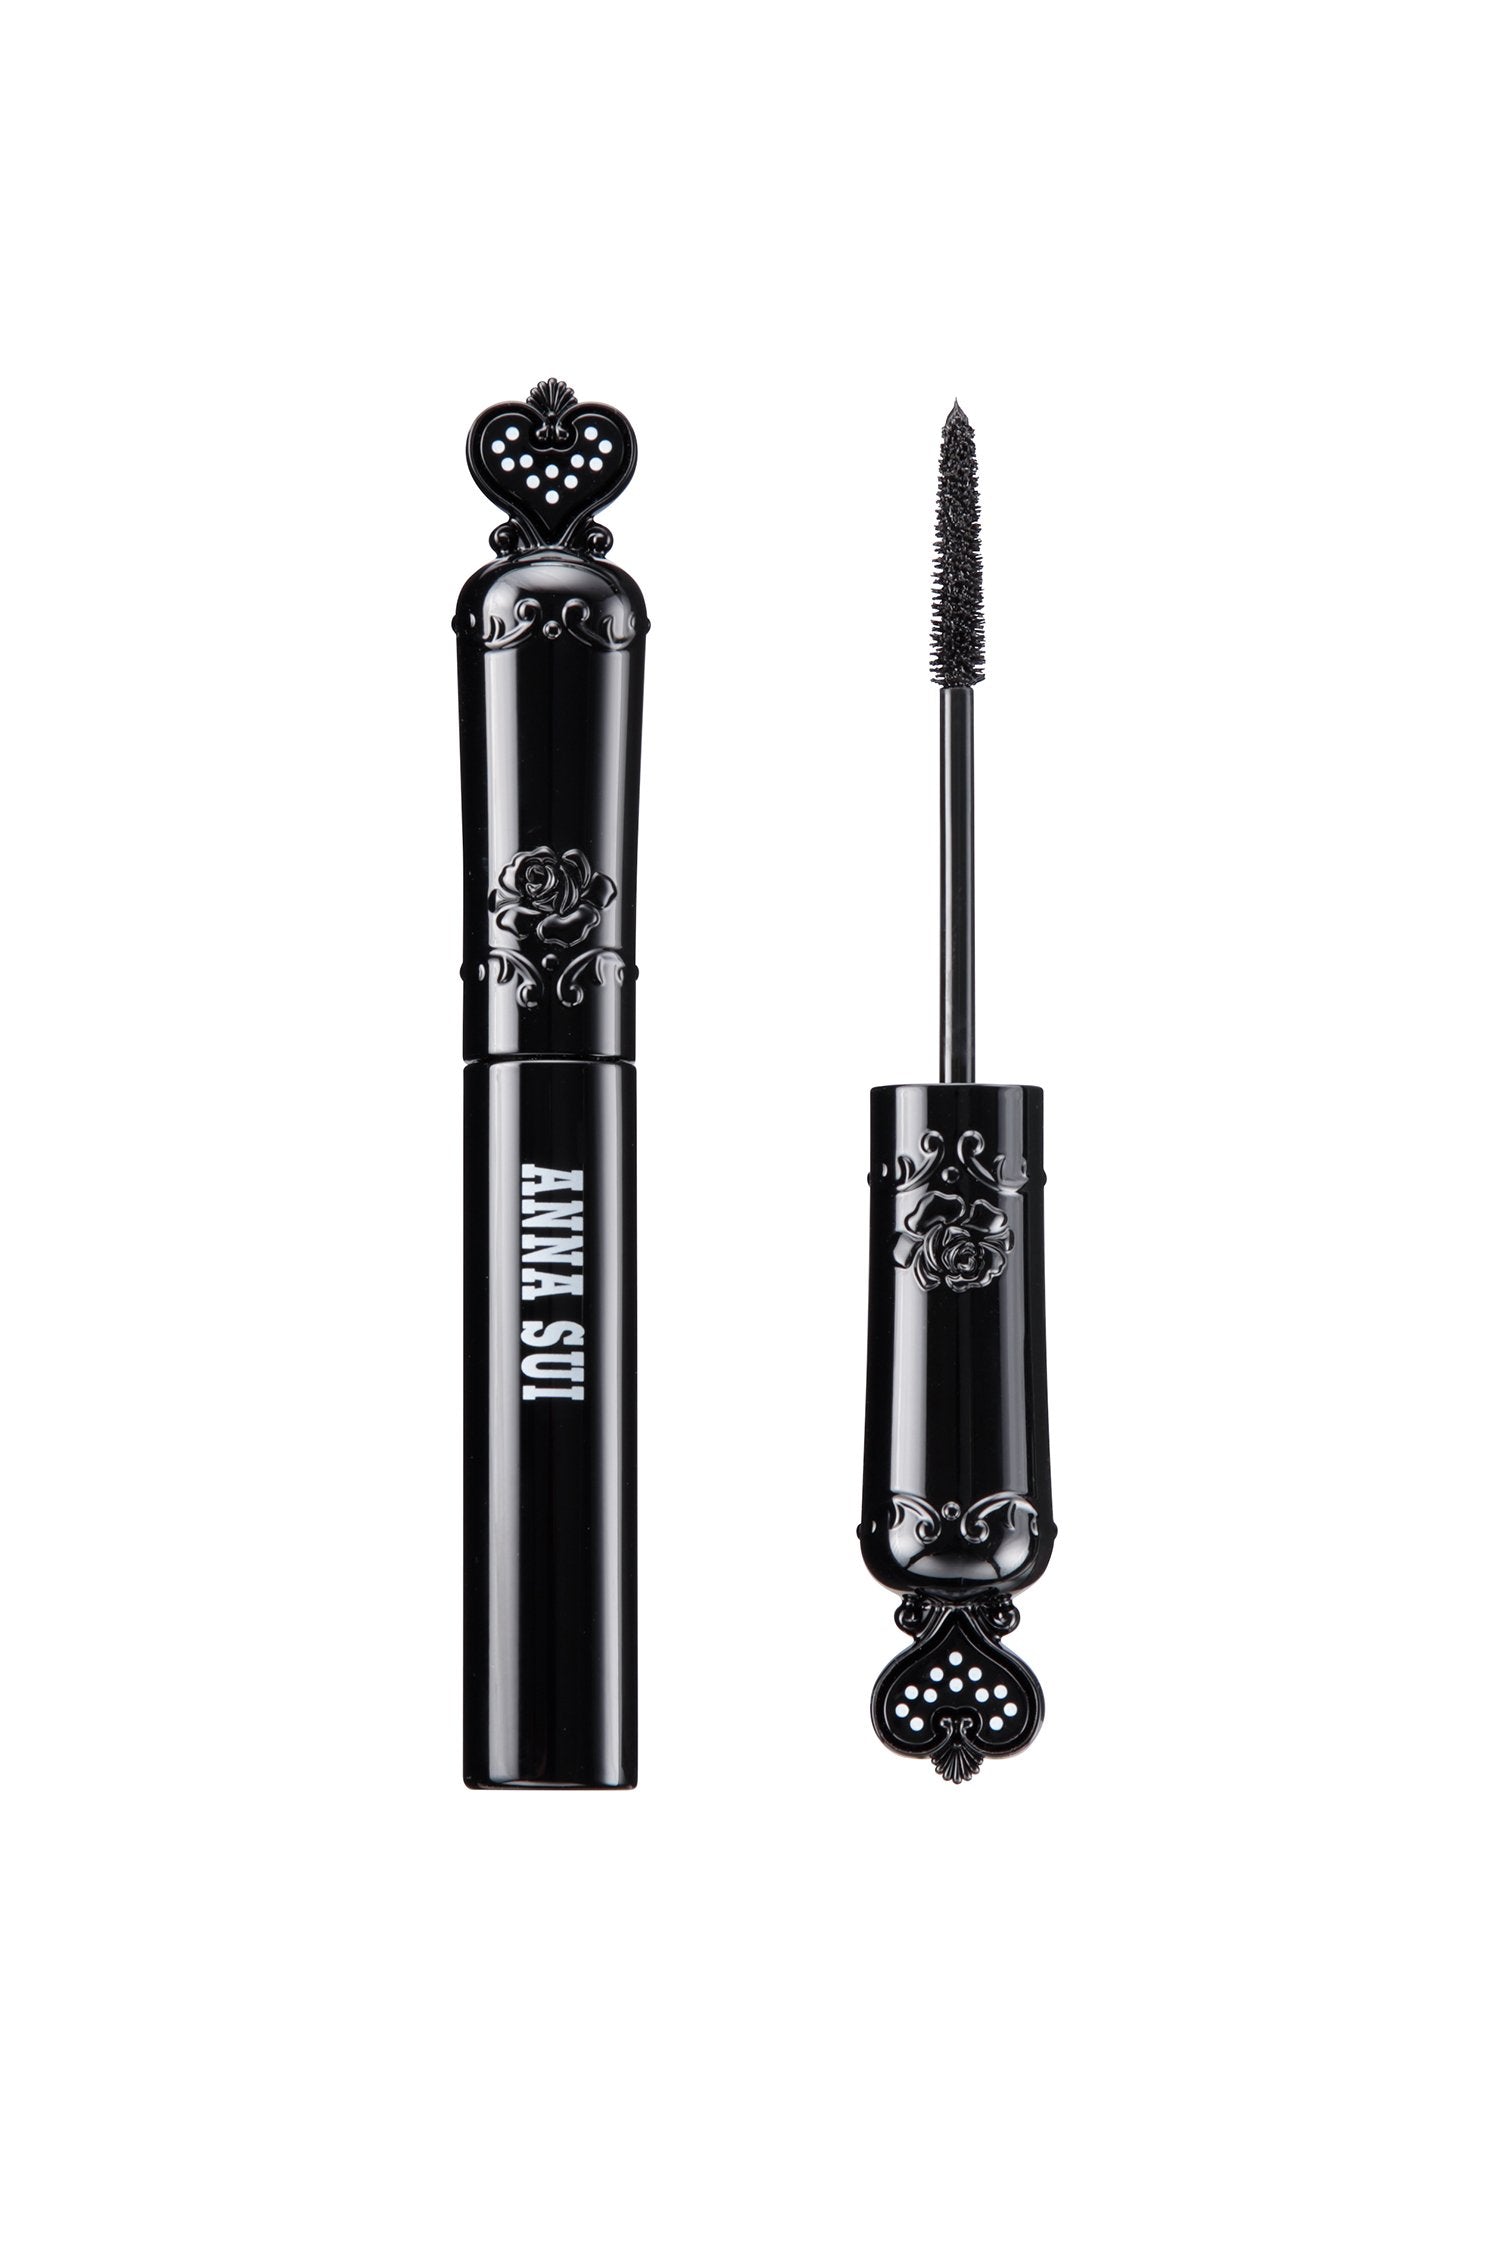 In cylindrical black container with a heart-shaped lid, the mascara features a cone-shaped brush to coat lashes evenly